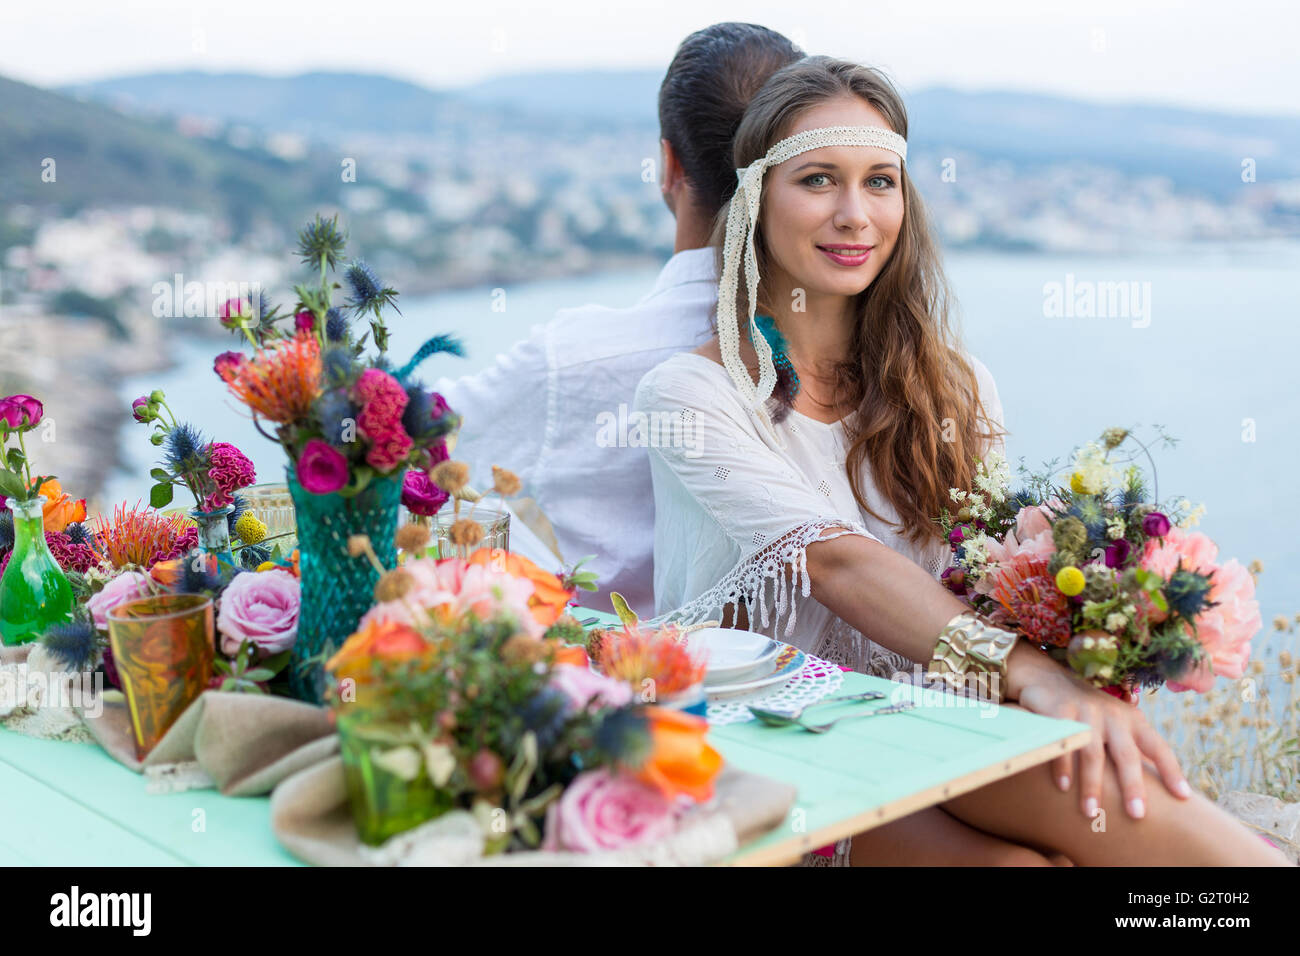 girl with a wedding bouquet boho style Stock Photo